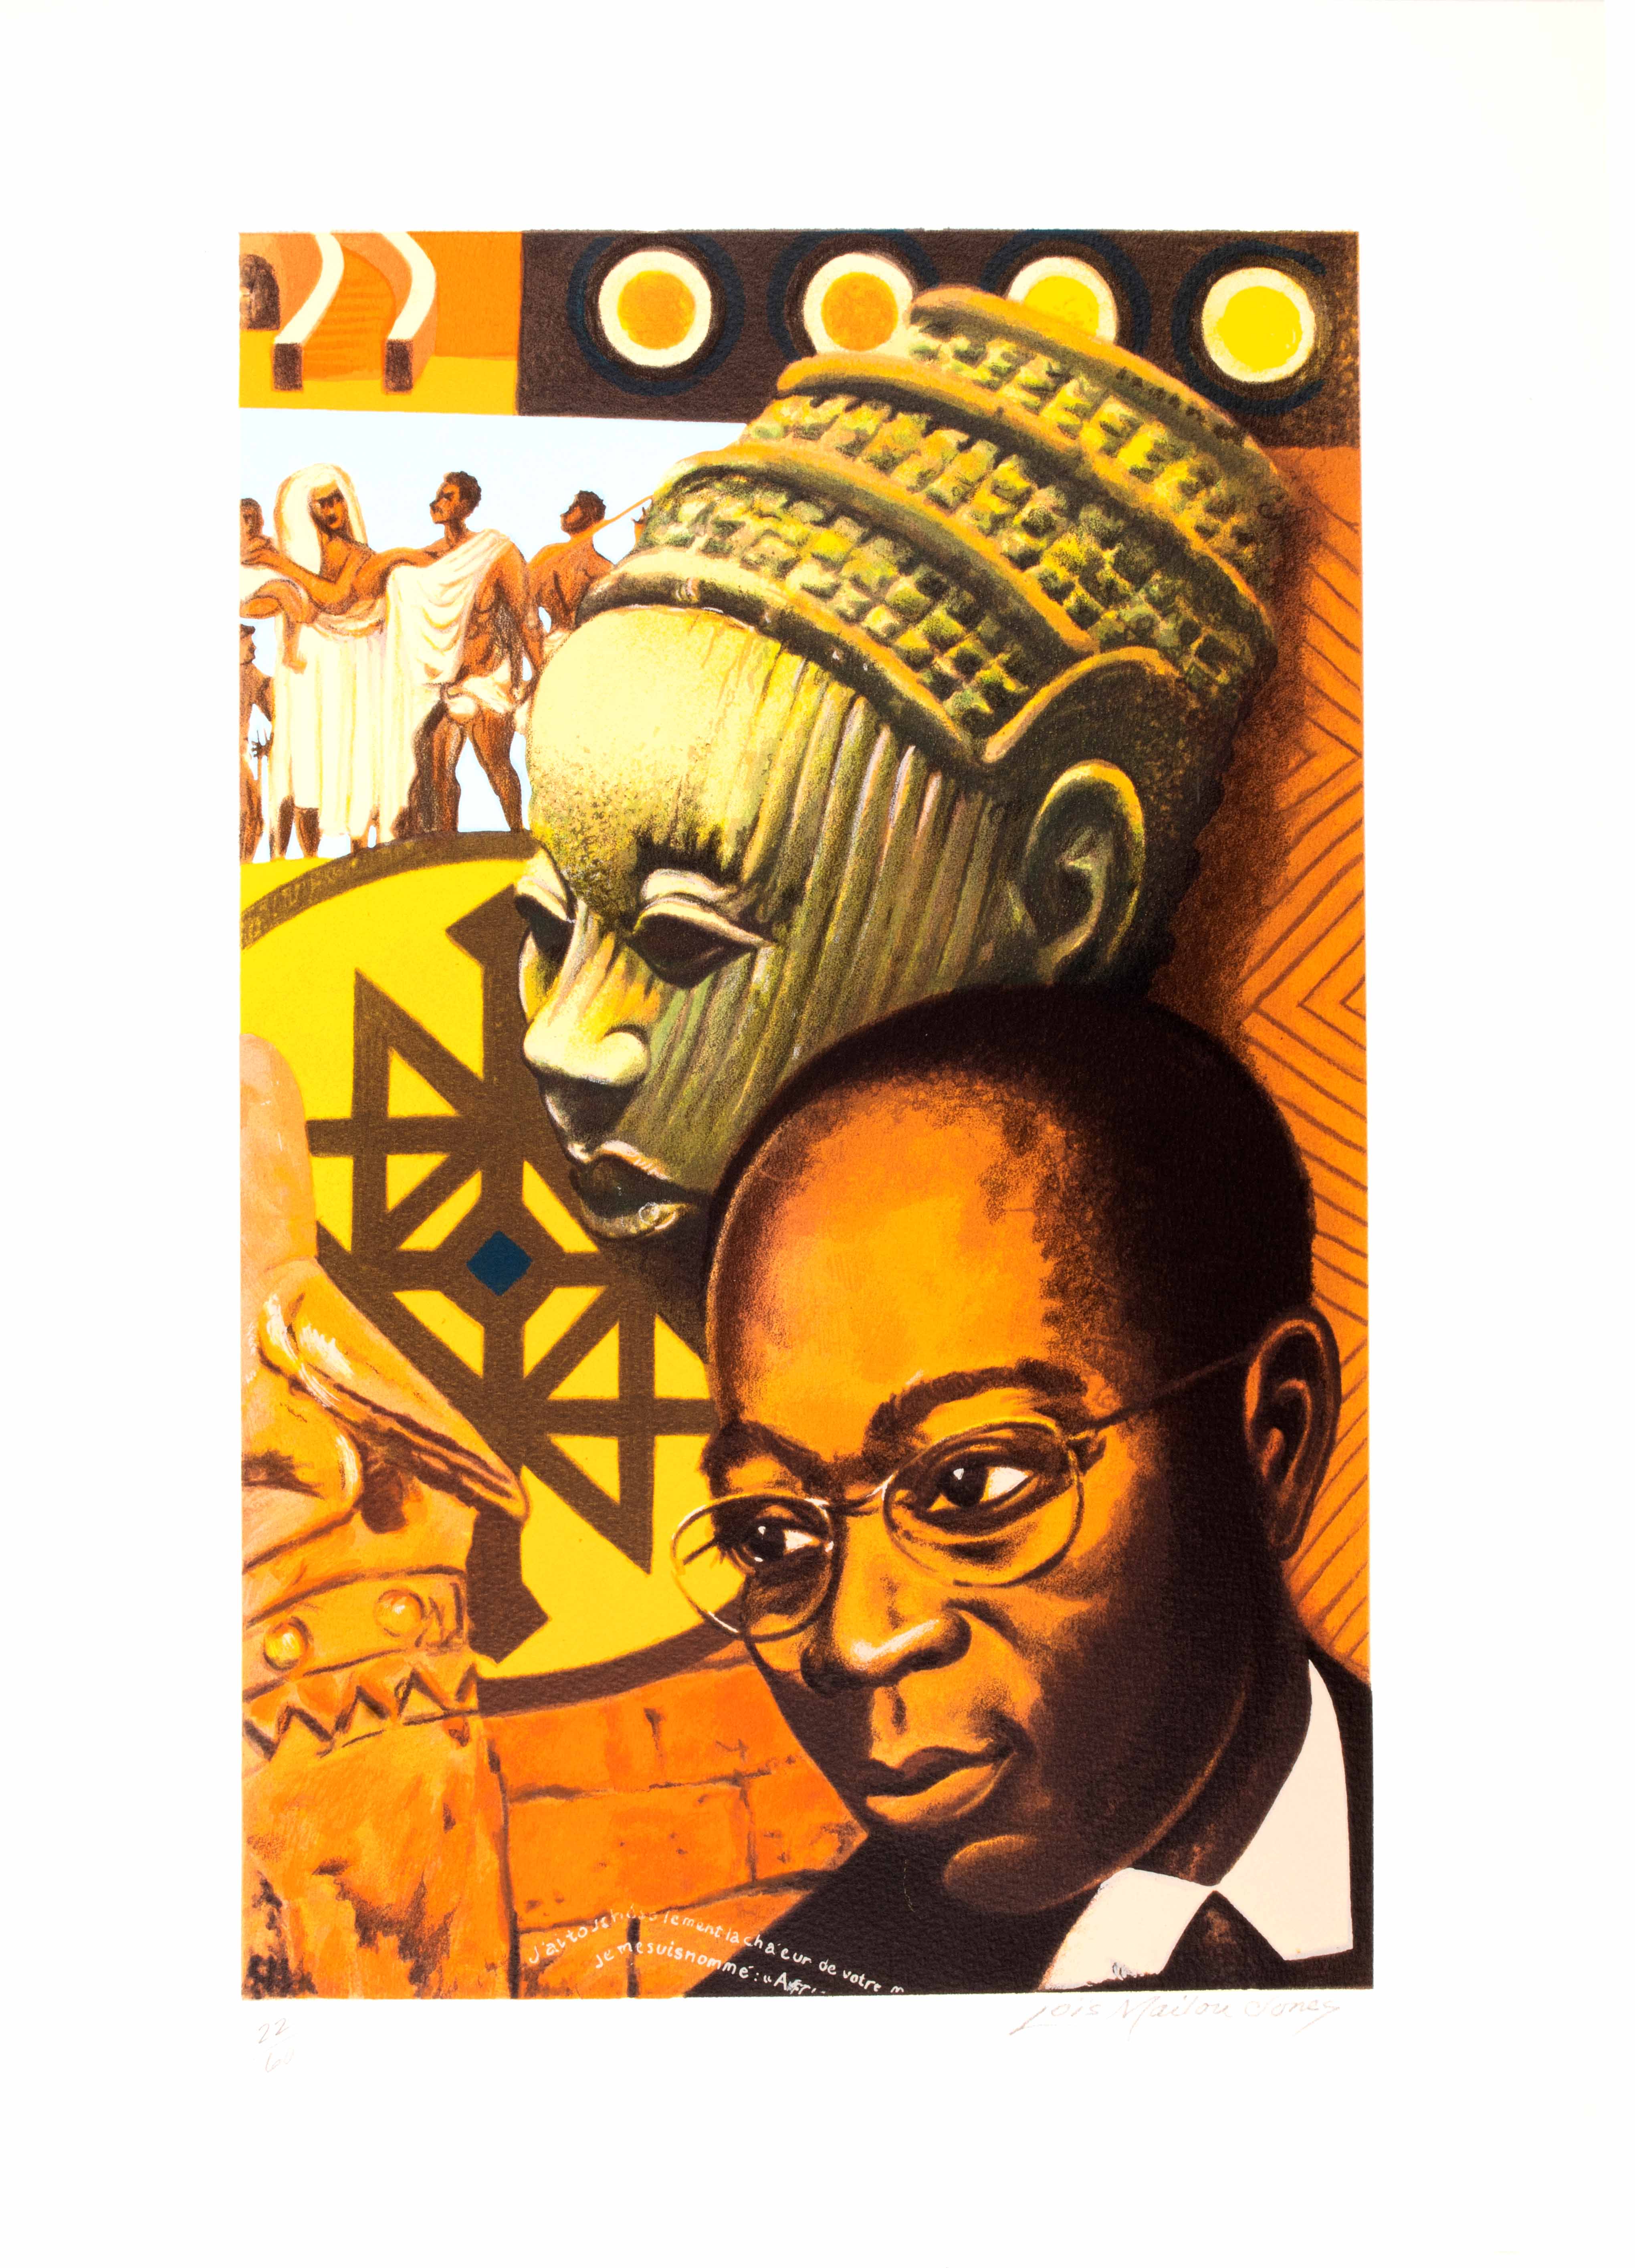 Print of eopold Sédar Senghor, a Senegalese politician, poet and cultural theorist in warm, yellow tones.